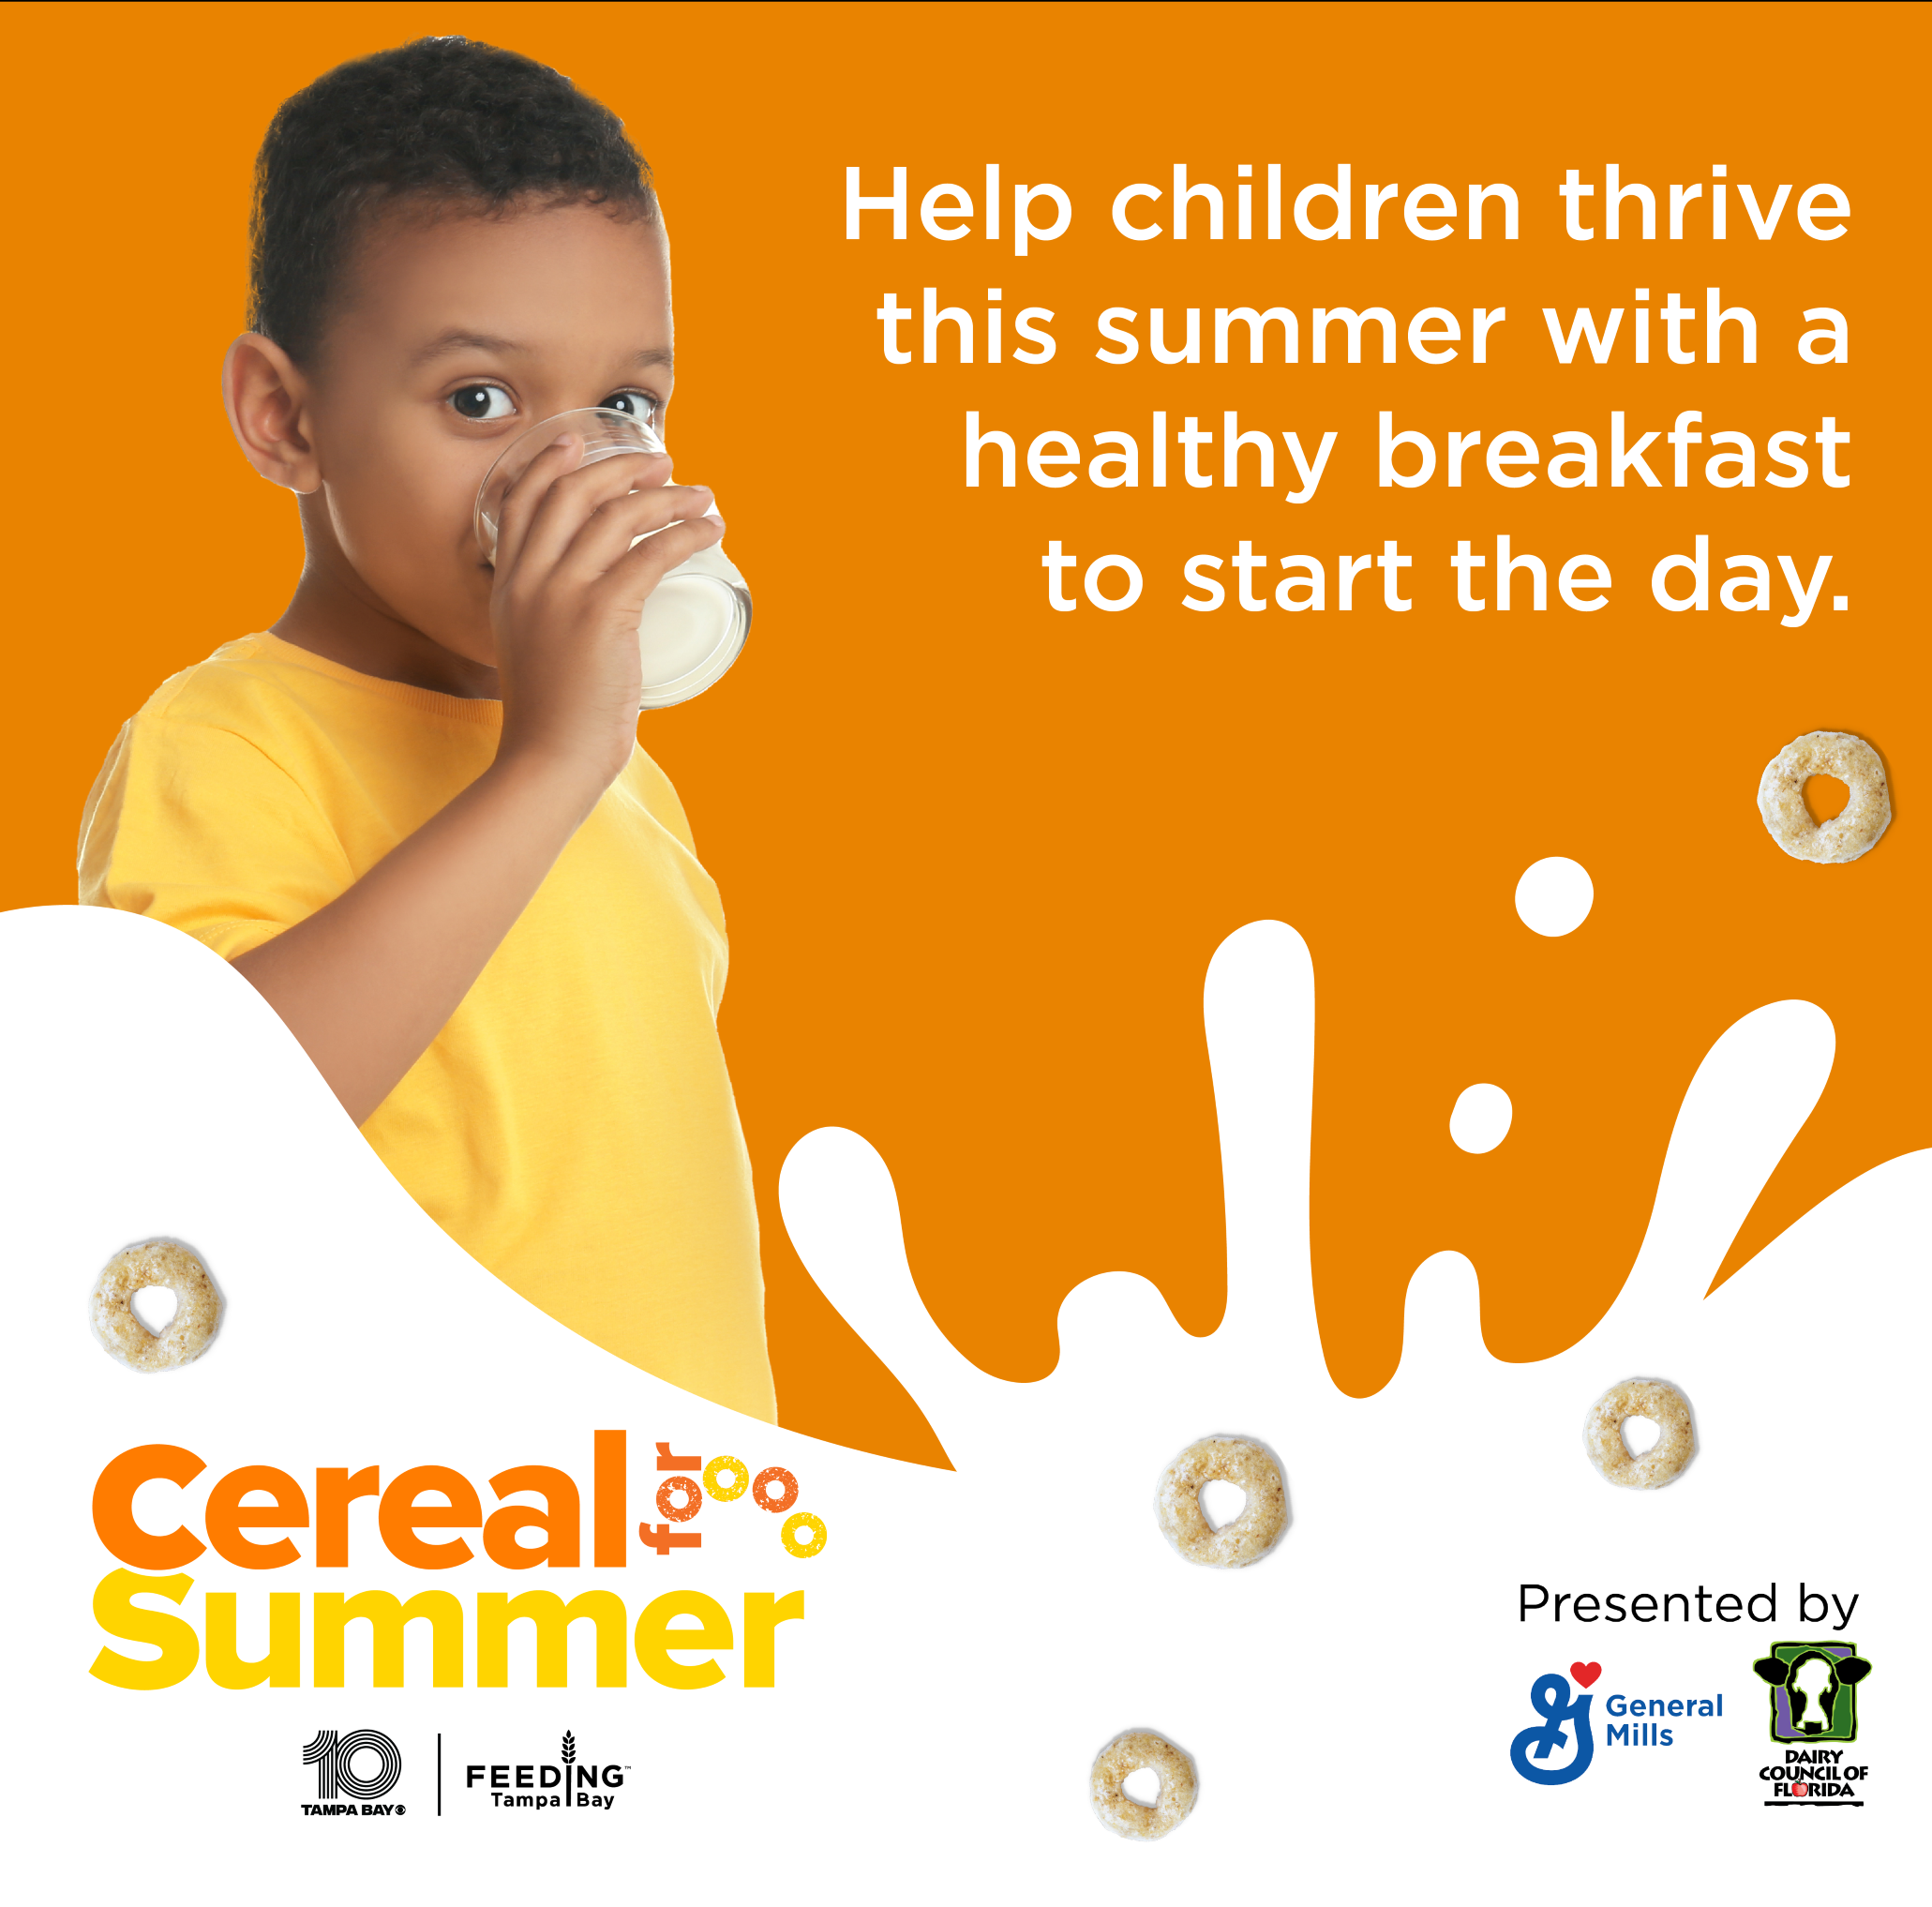 Help children thrive this summer with a healthy breakfast to start the day